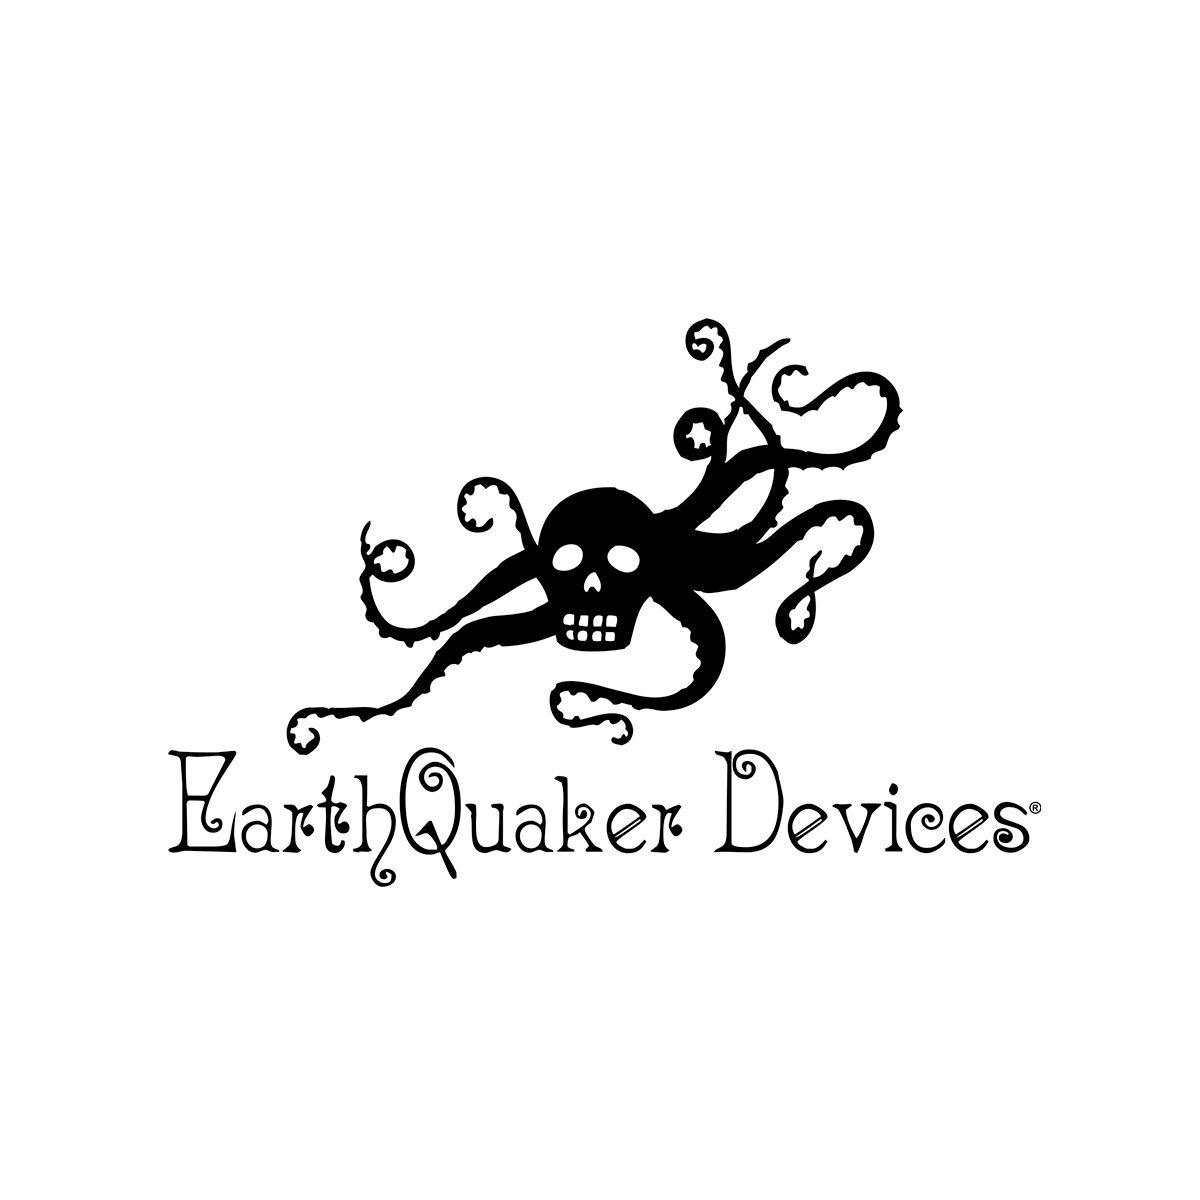 www.earthquakerdevices.com